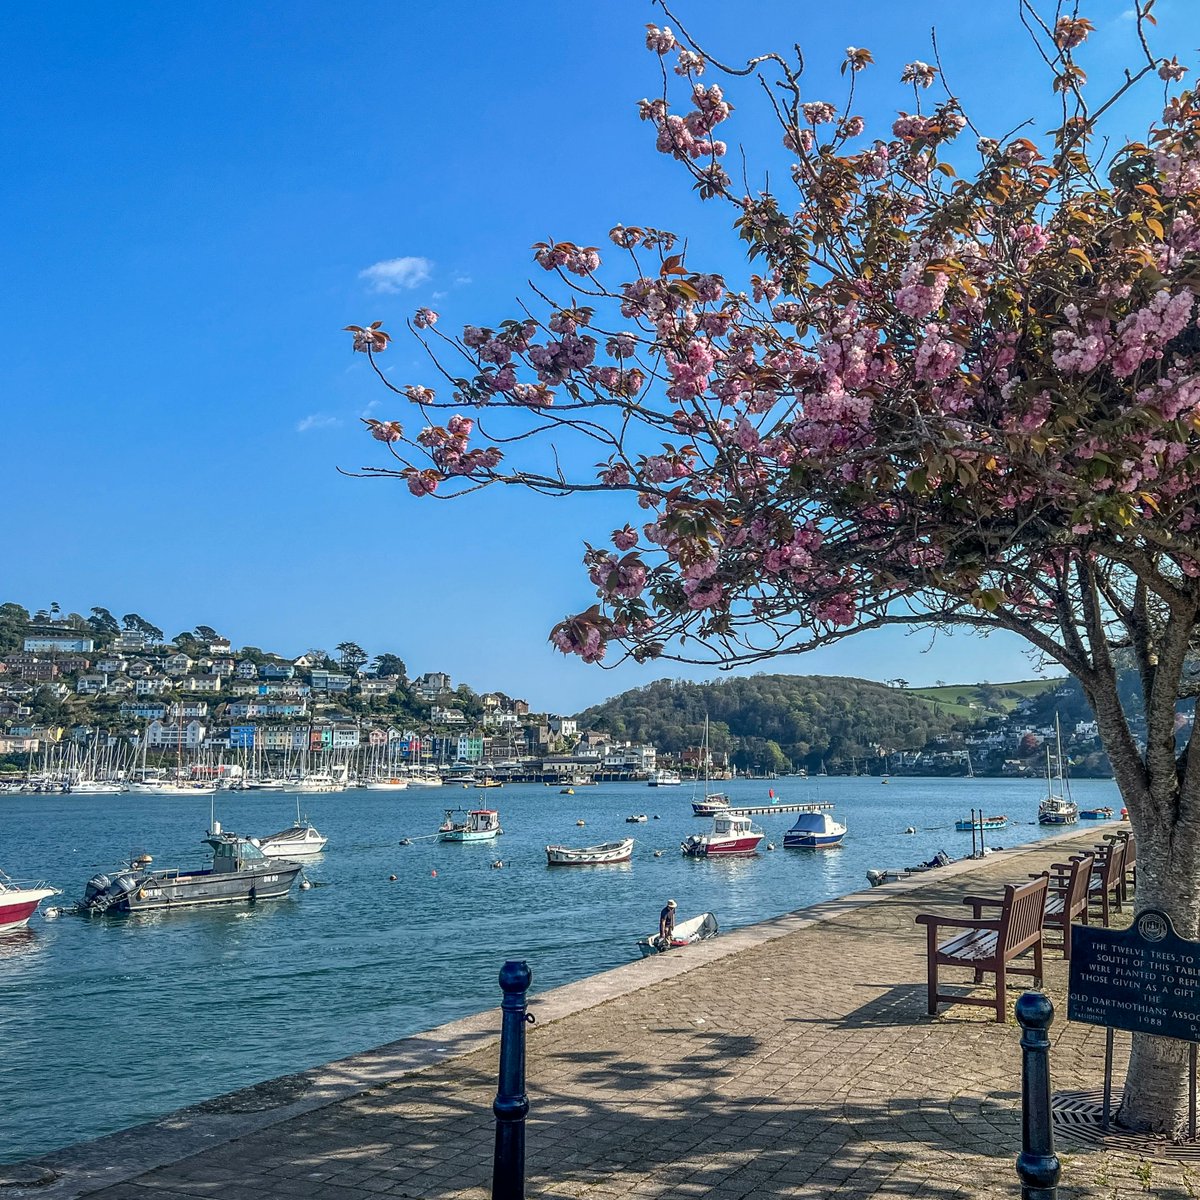 It's one of our favourite times of year here in South Devon - the gorgeous spring blossom is out in Dartmouth 🌸